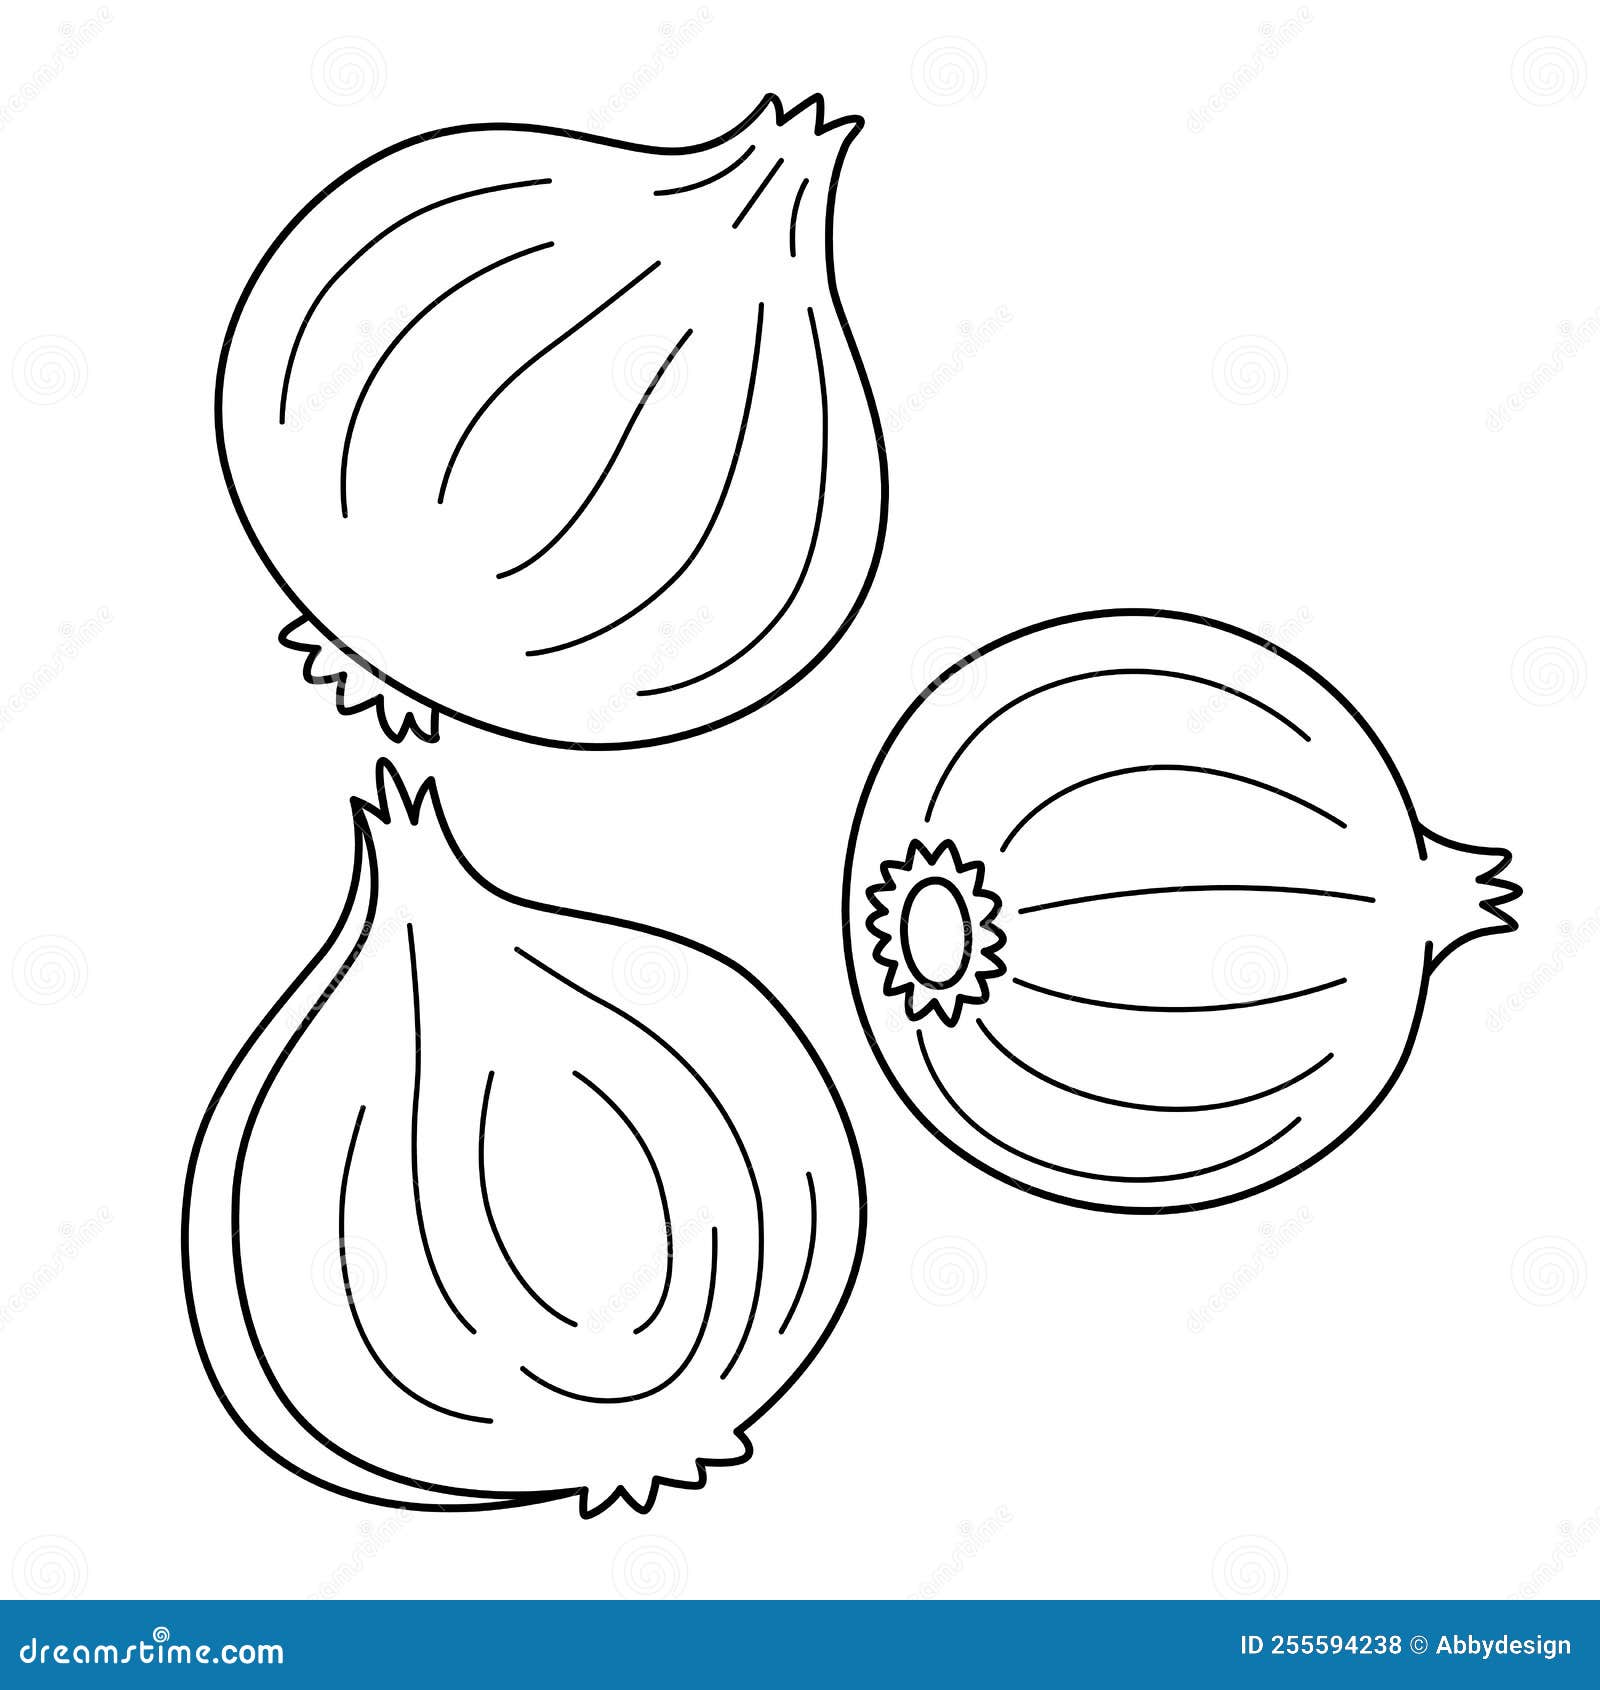 Draw a picture of onion//how to make a drawing onion - YouTube